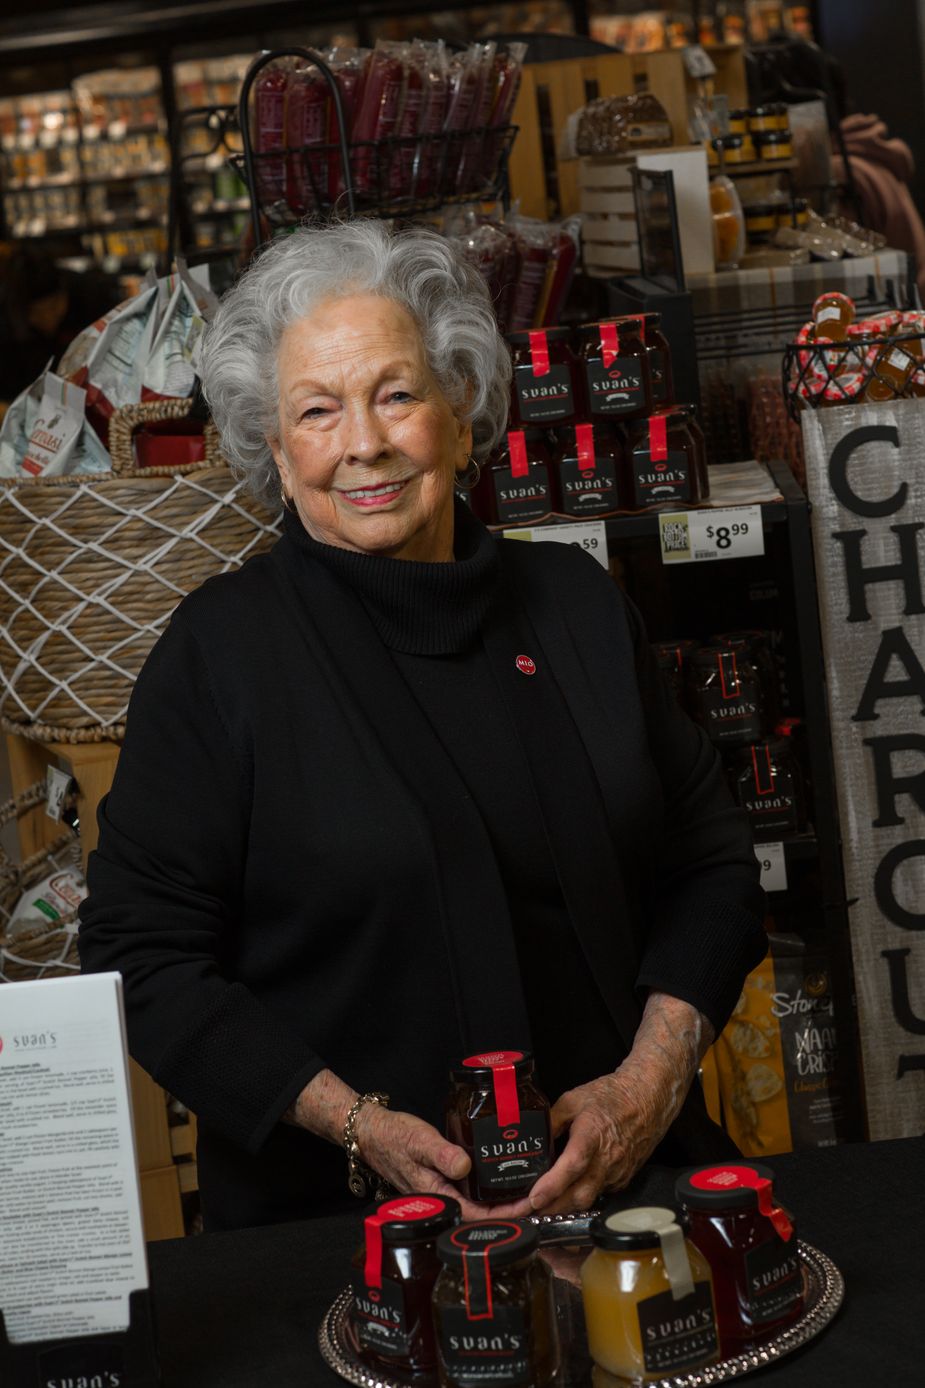 Suan’s Foods, founded by Suan Grant, is a line of condiments available in grocery stores around the state, including the newest location of Crest Foods in Edmond. Grant is an alumna of the FAPC program. Photo by Brent Fuchs